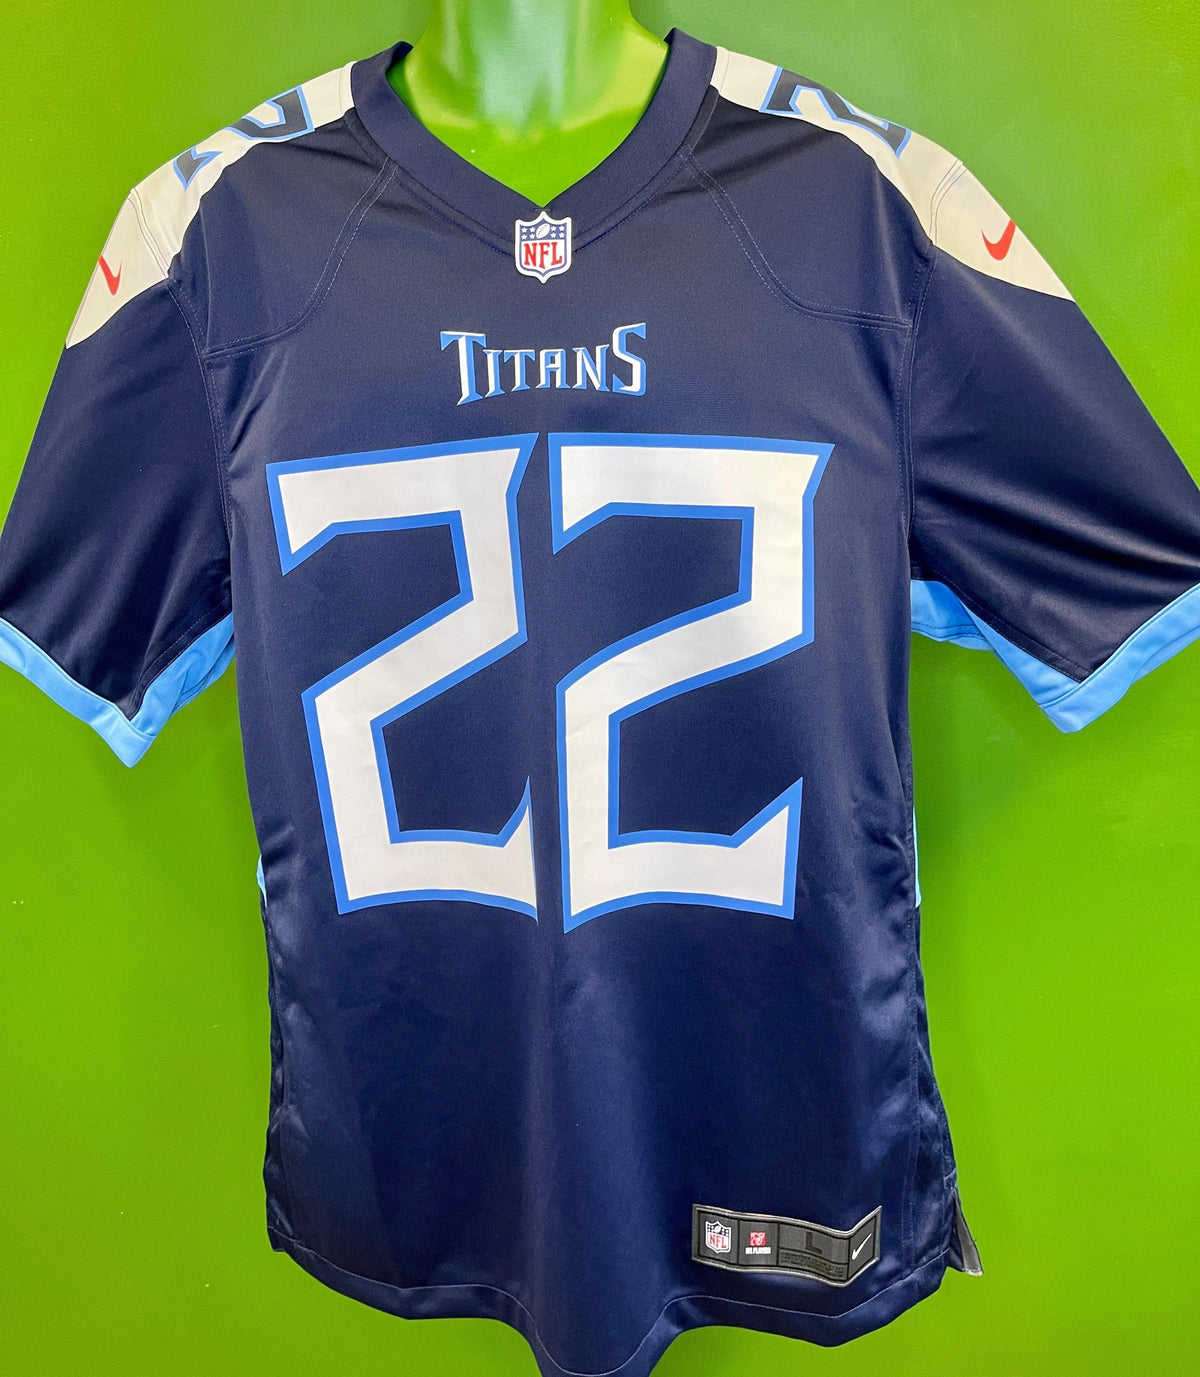 NFL Tennessee Titans Derrick Henry #22 Game Jersey Men's Large NWT